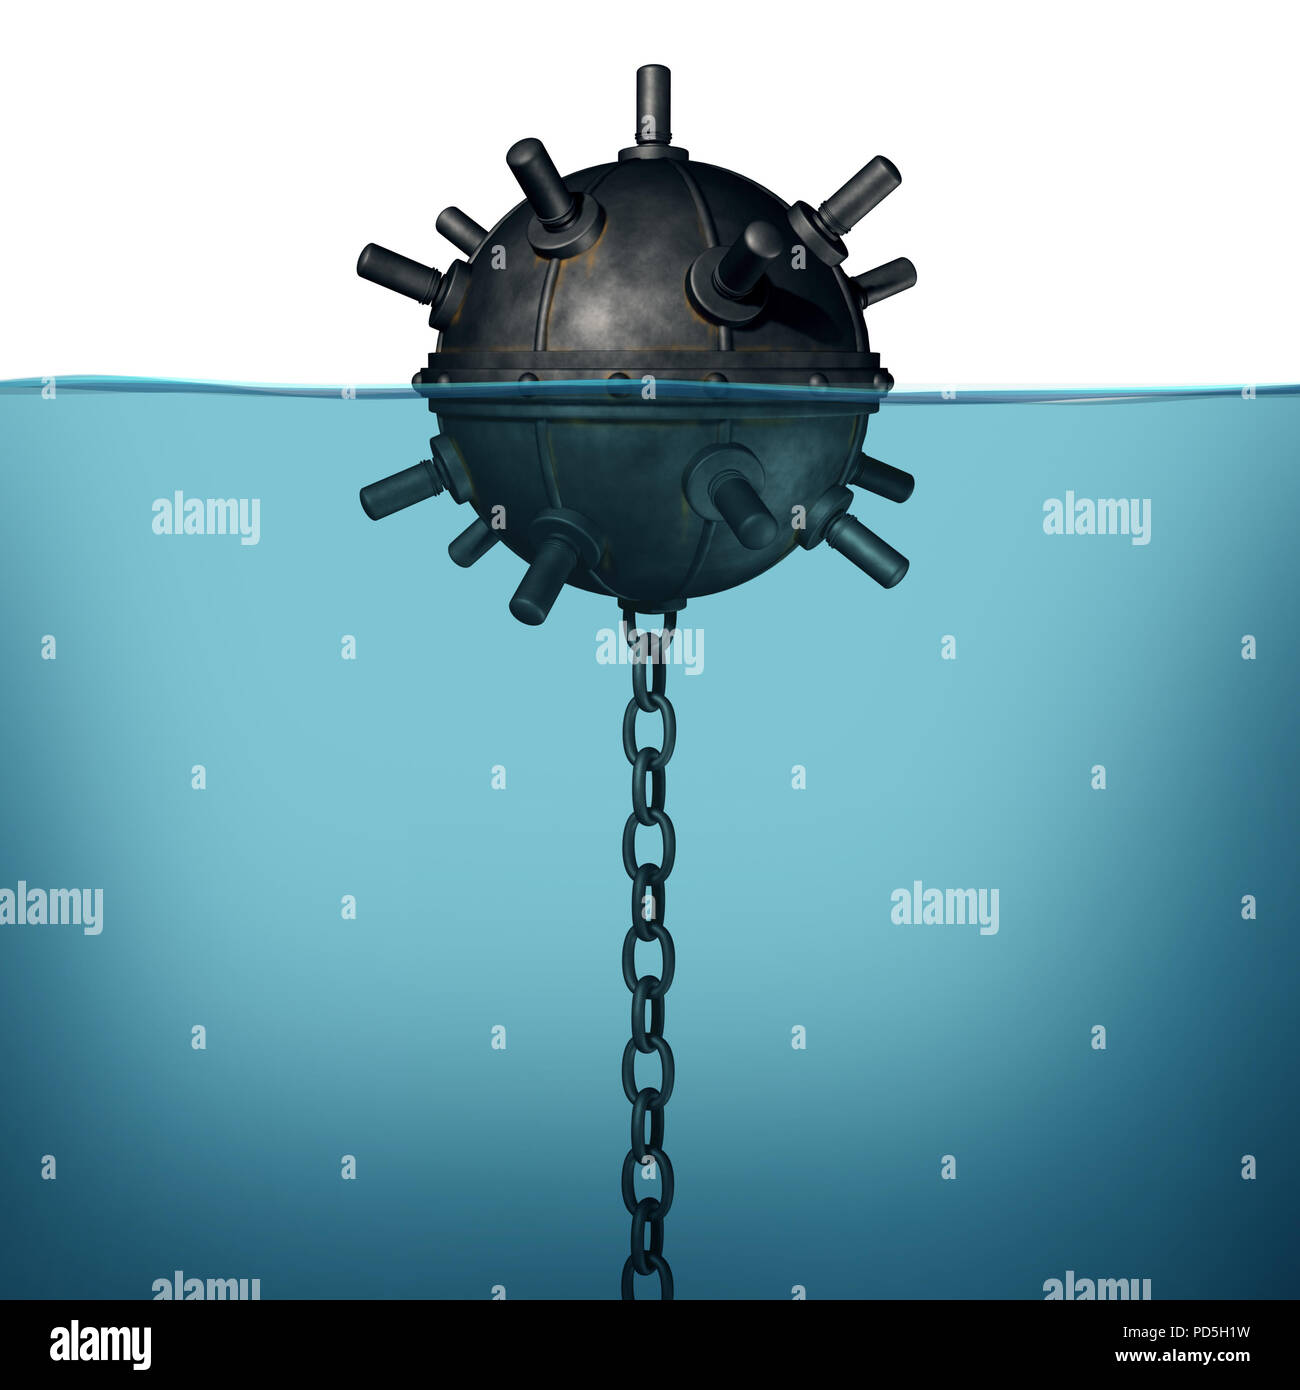 Sea mine underwater explosive device object concept as a 3D render of a naval ocean bomb. Stock Photo